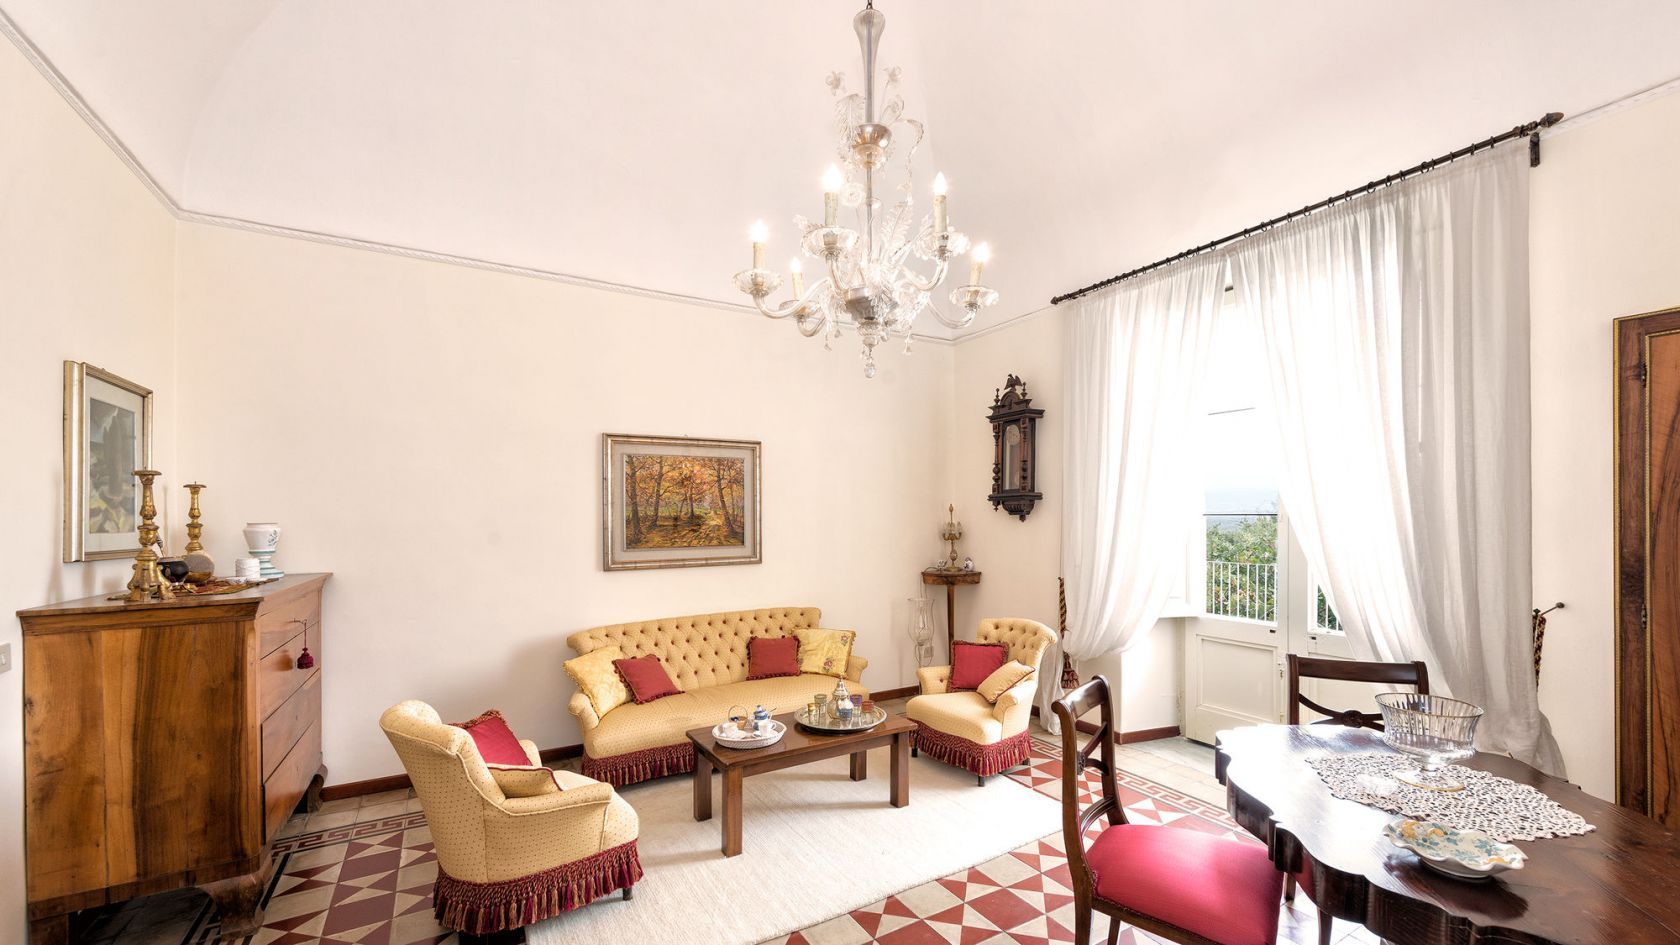 An historical villa with antique furniture